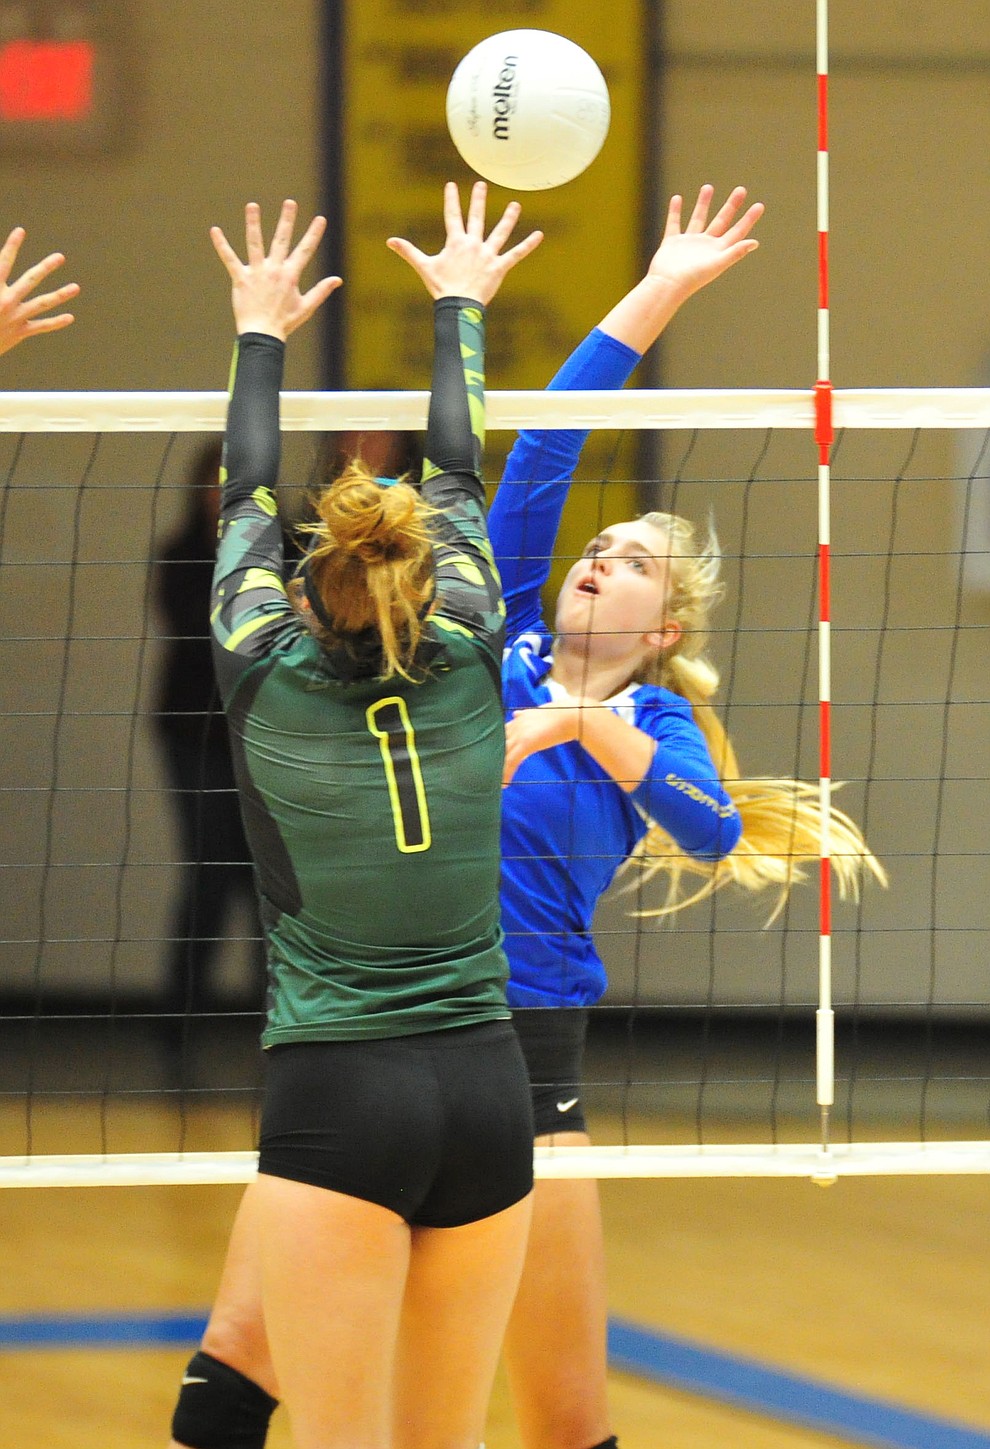 Prescott's Kathrine Radavich goes for a kill as the Badgers host the Flagstaff Eagles in volleyball Thursday, Oct. 18, 2018 in Prescott. (Les Stukenberg/Courier)